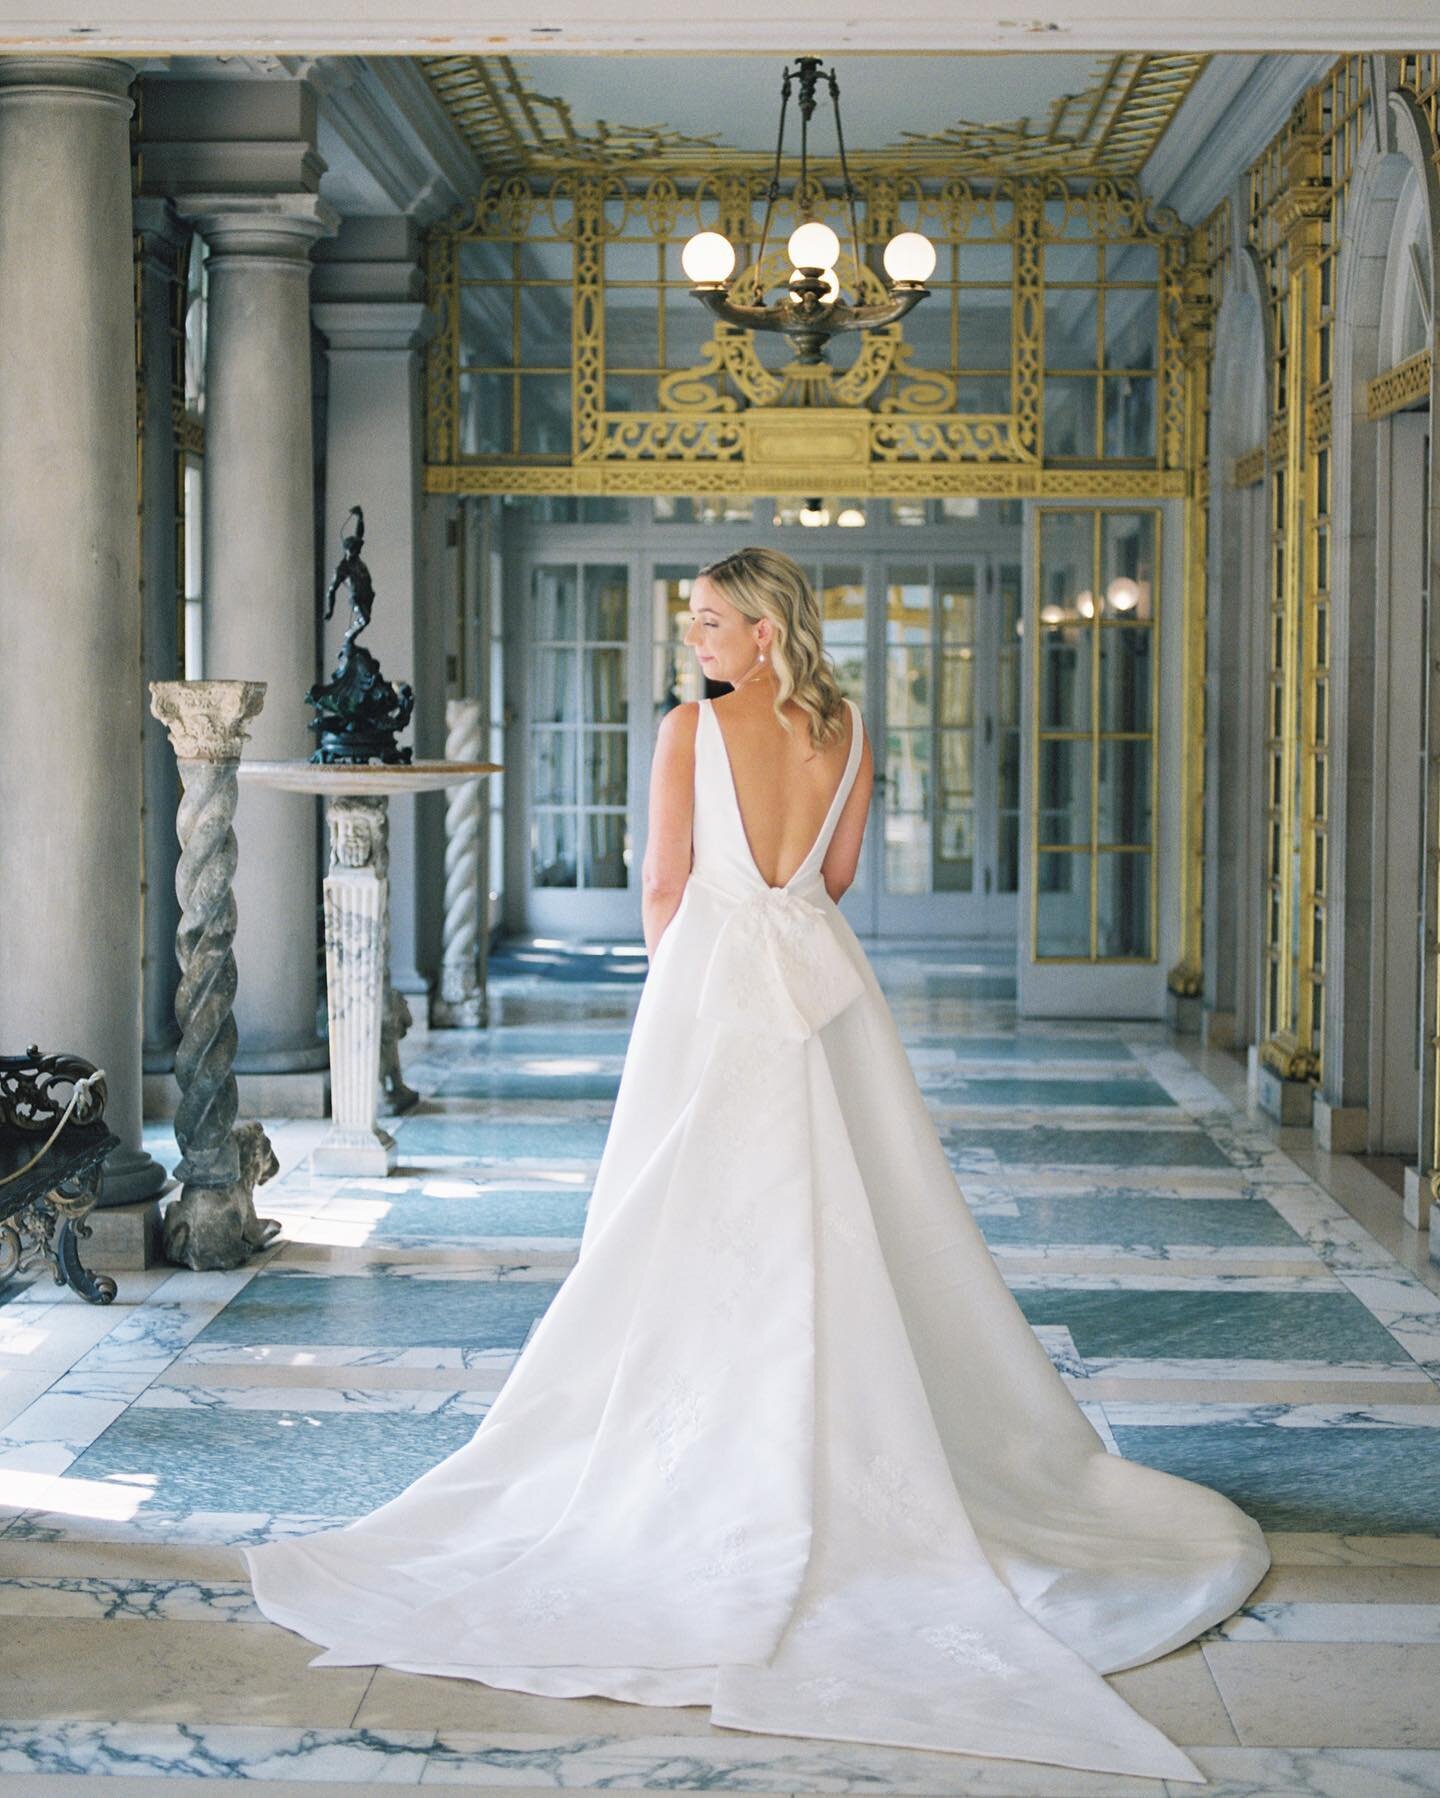 This was taken right as Megan was waiting for her groom to join for first look&mdash; such an absolute vision in this gorgeous space! 🥰 // @eventsatandersonhouse @caitlynmeyerpro @pronovias @elegancebyroyaoldtown @impact_collective @manebynono @rewi